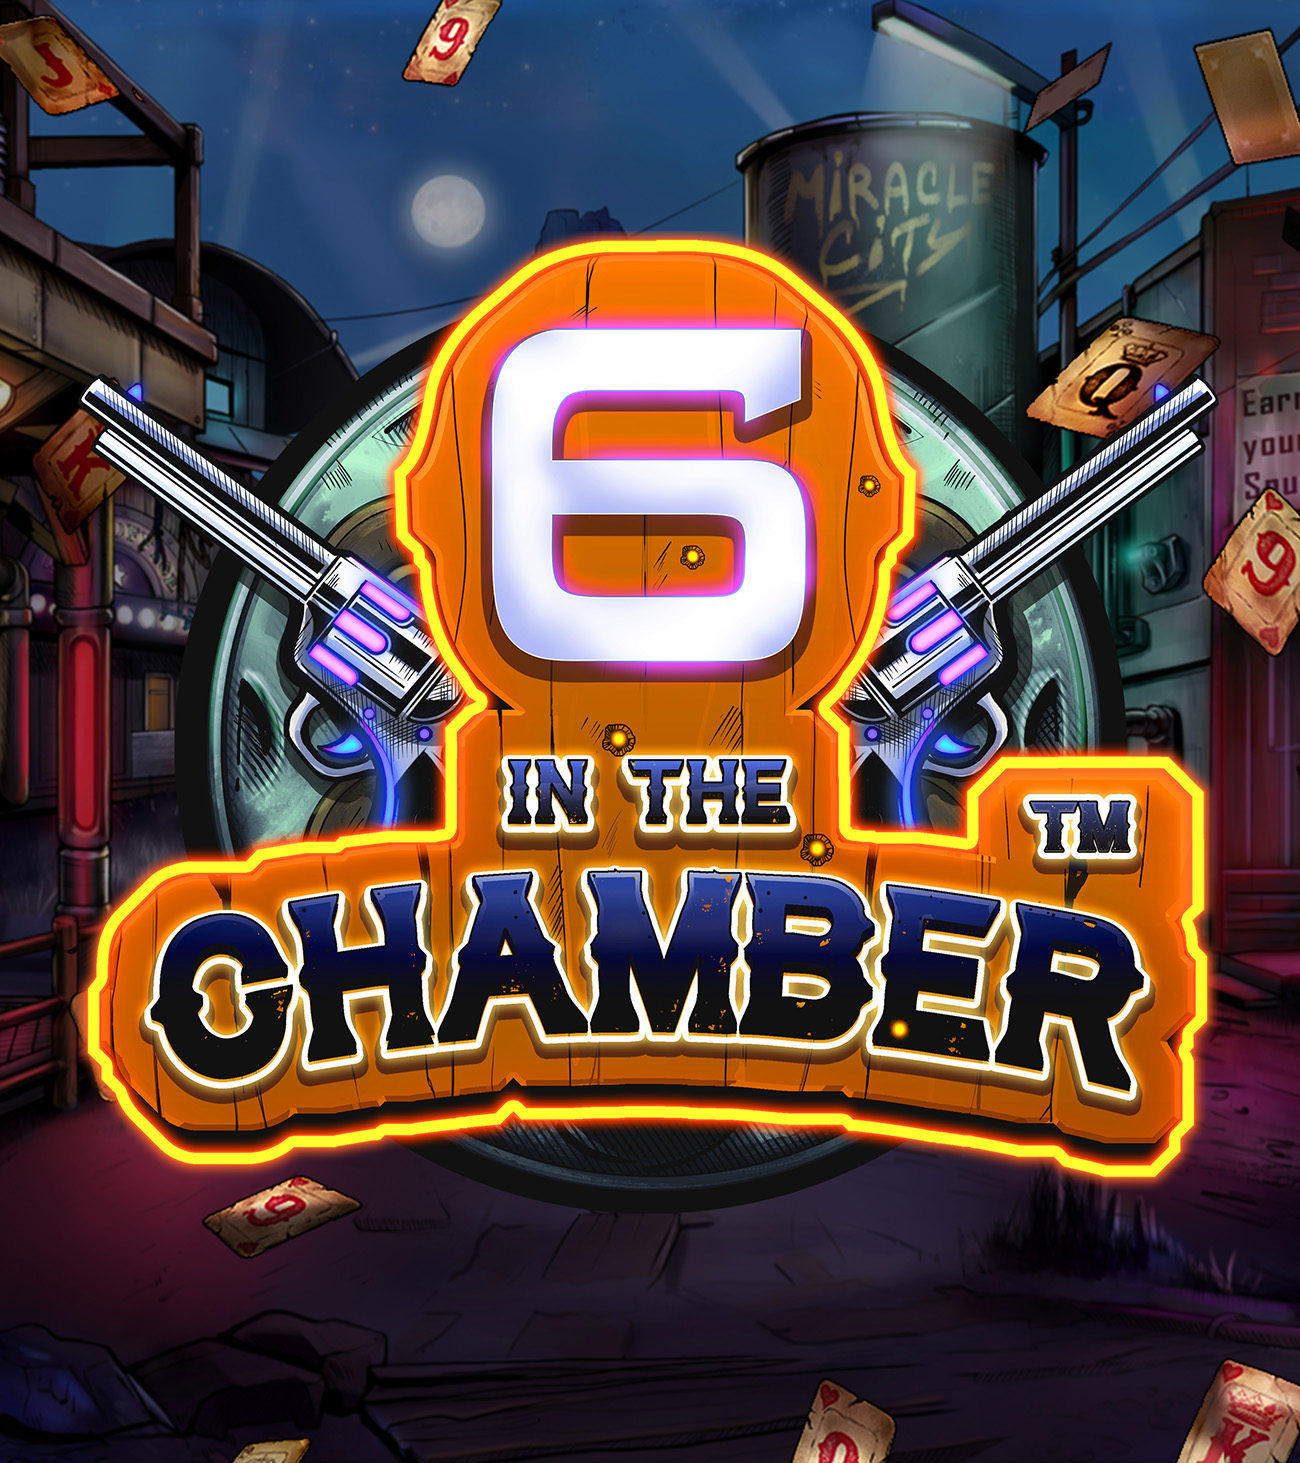 6 in the Chamber™ combines the Wild West, Cyberpunk, exciting bonus features and big winning potential!